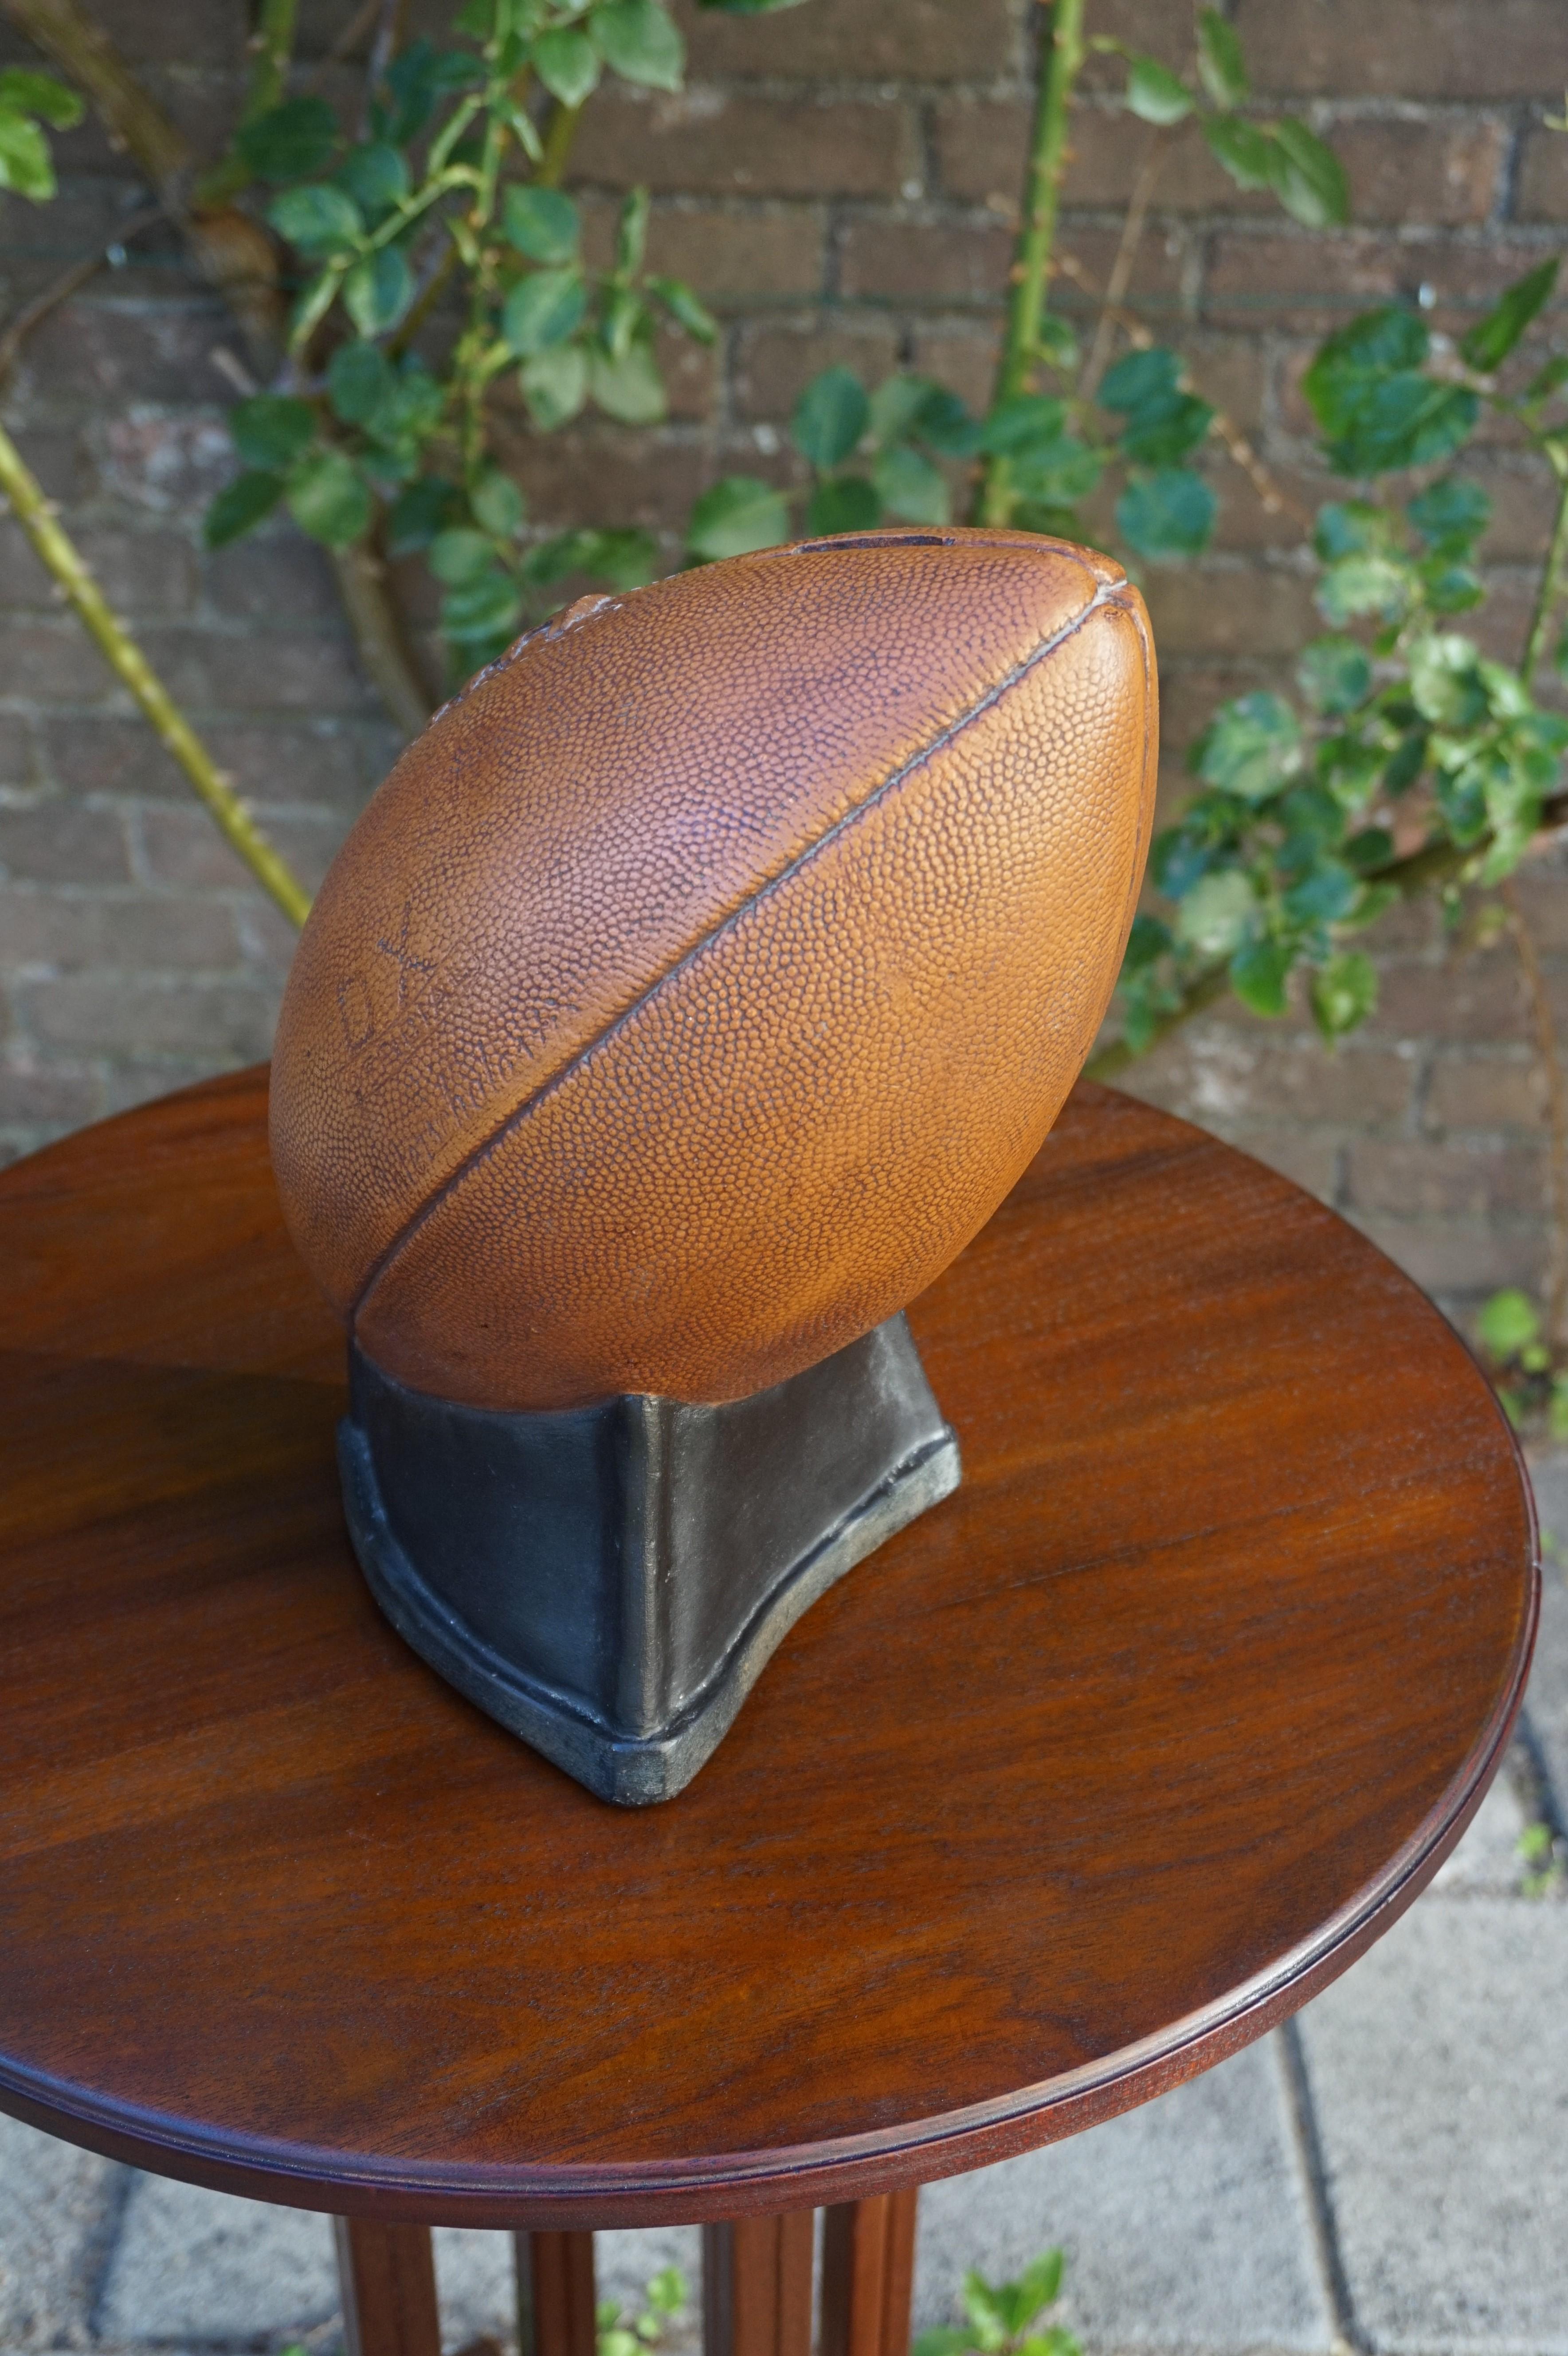 Vintage & Very Realistic Football Money Box Moneybox of Hand-Painted Plaster 2